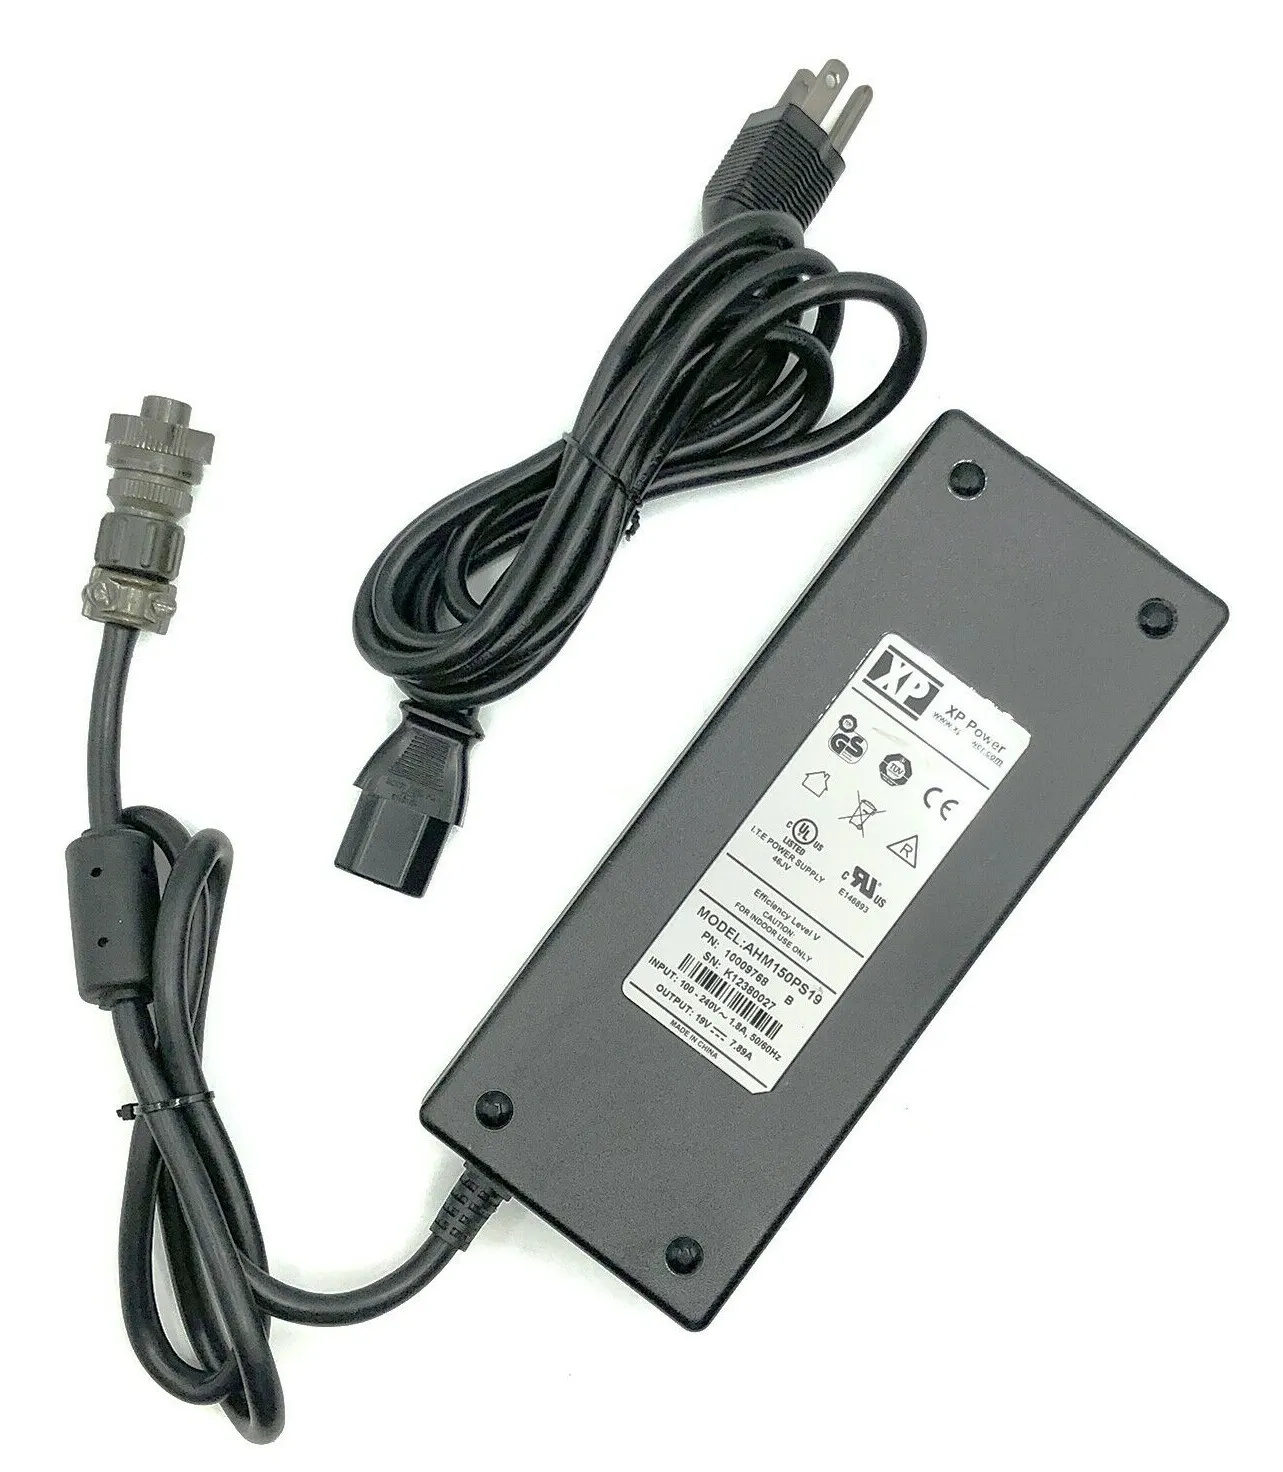 *Brand NEW*Genuine XP Power 19V 7.89A 150W AC Adapter for Medical AHM150PS19 10009768 POWER Supply